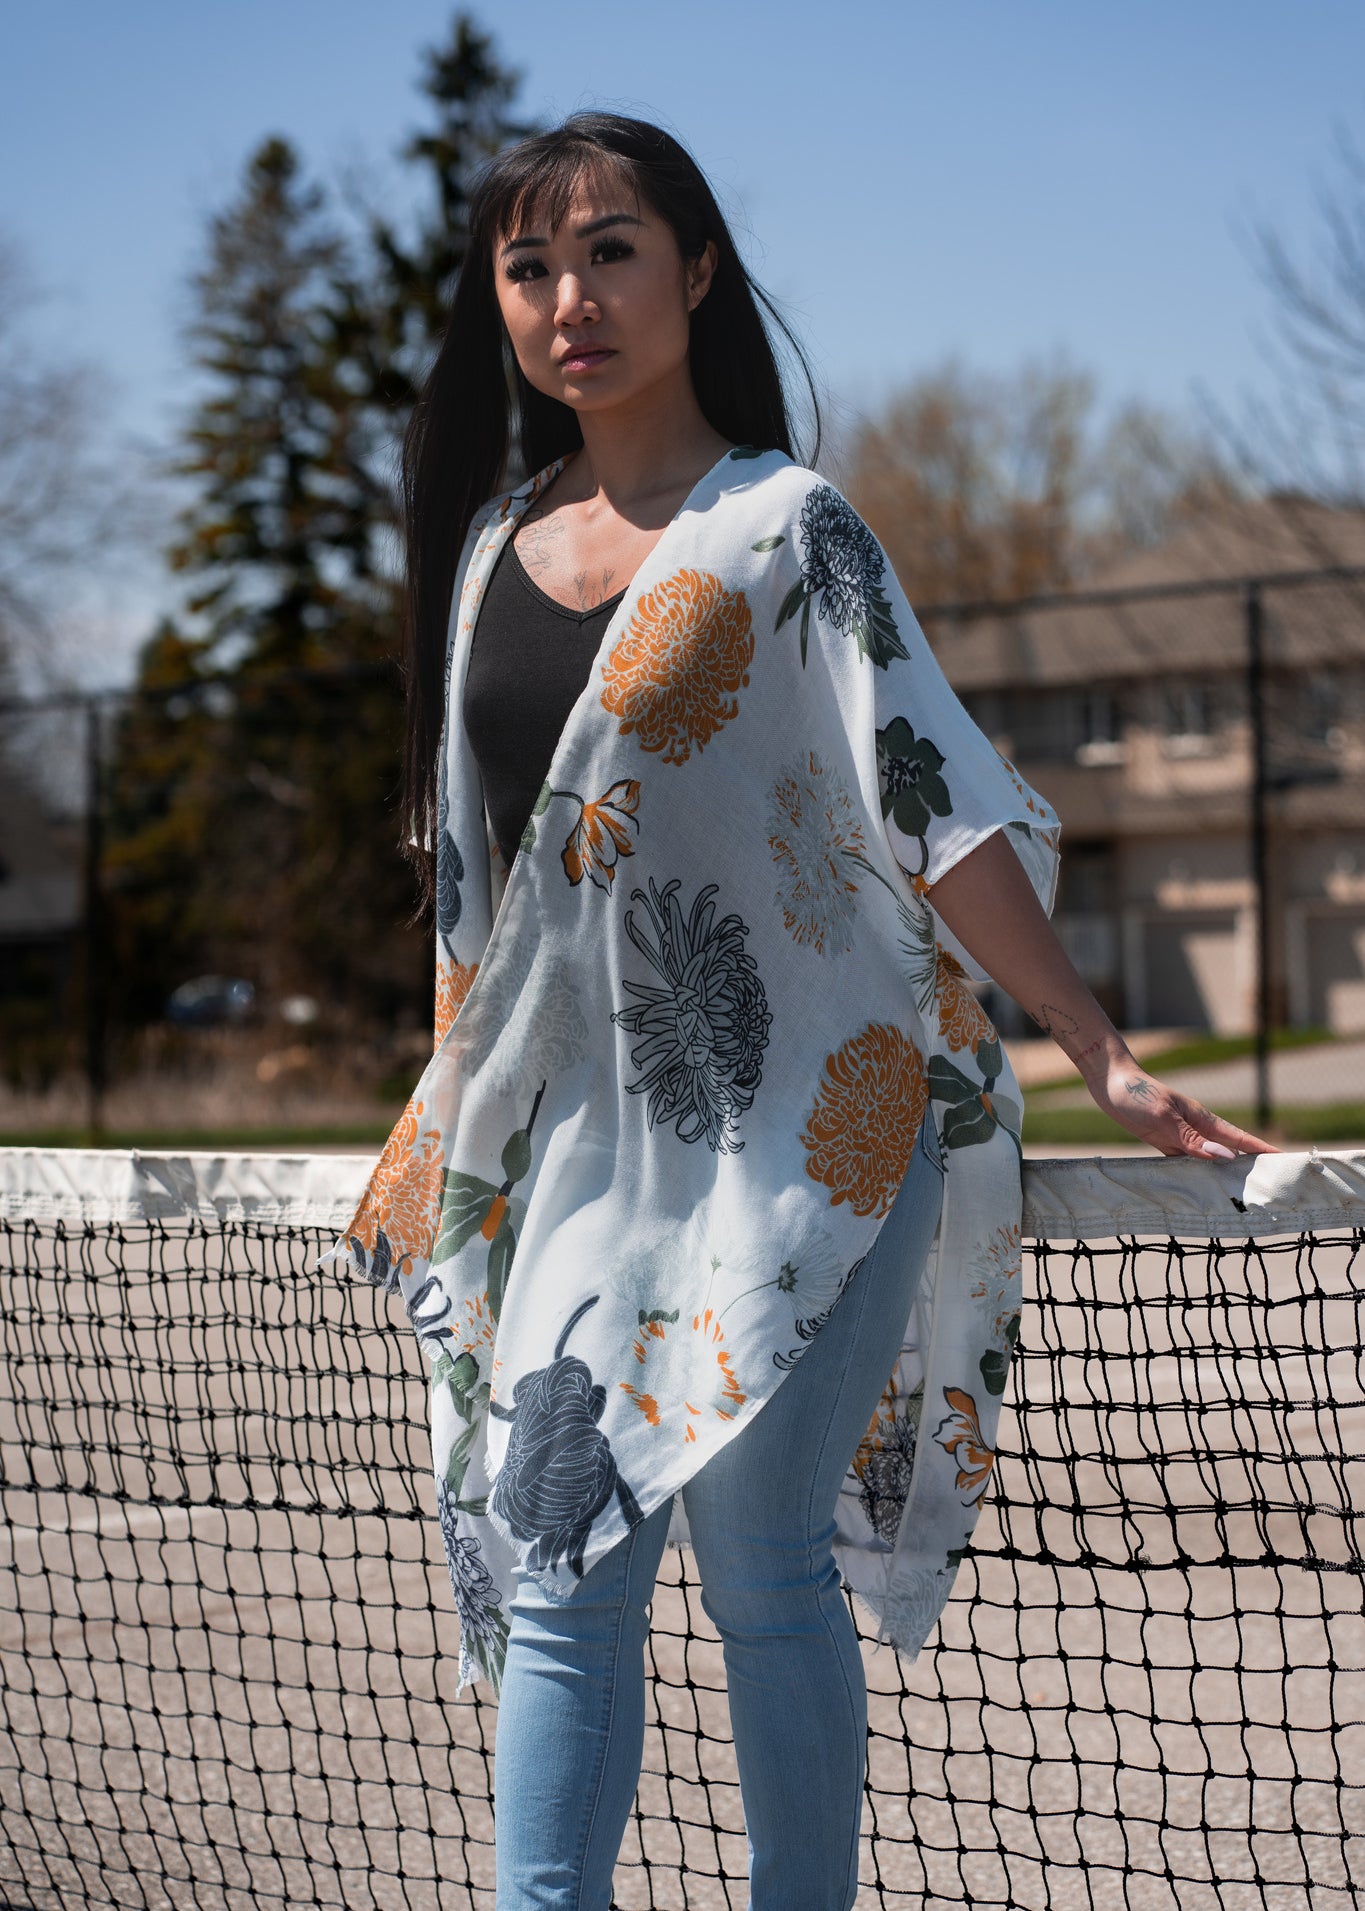 Woman wearing white floral beach cover up standing in front of tennis court net, with jeans and bamboo tank top, Shop T.K.S